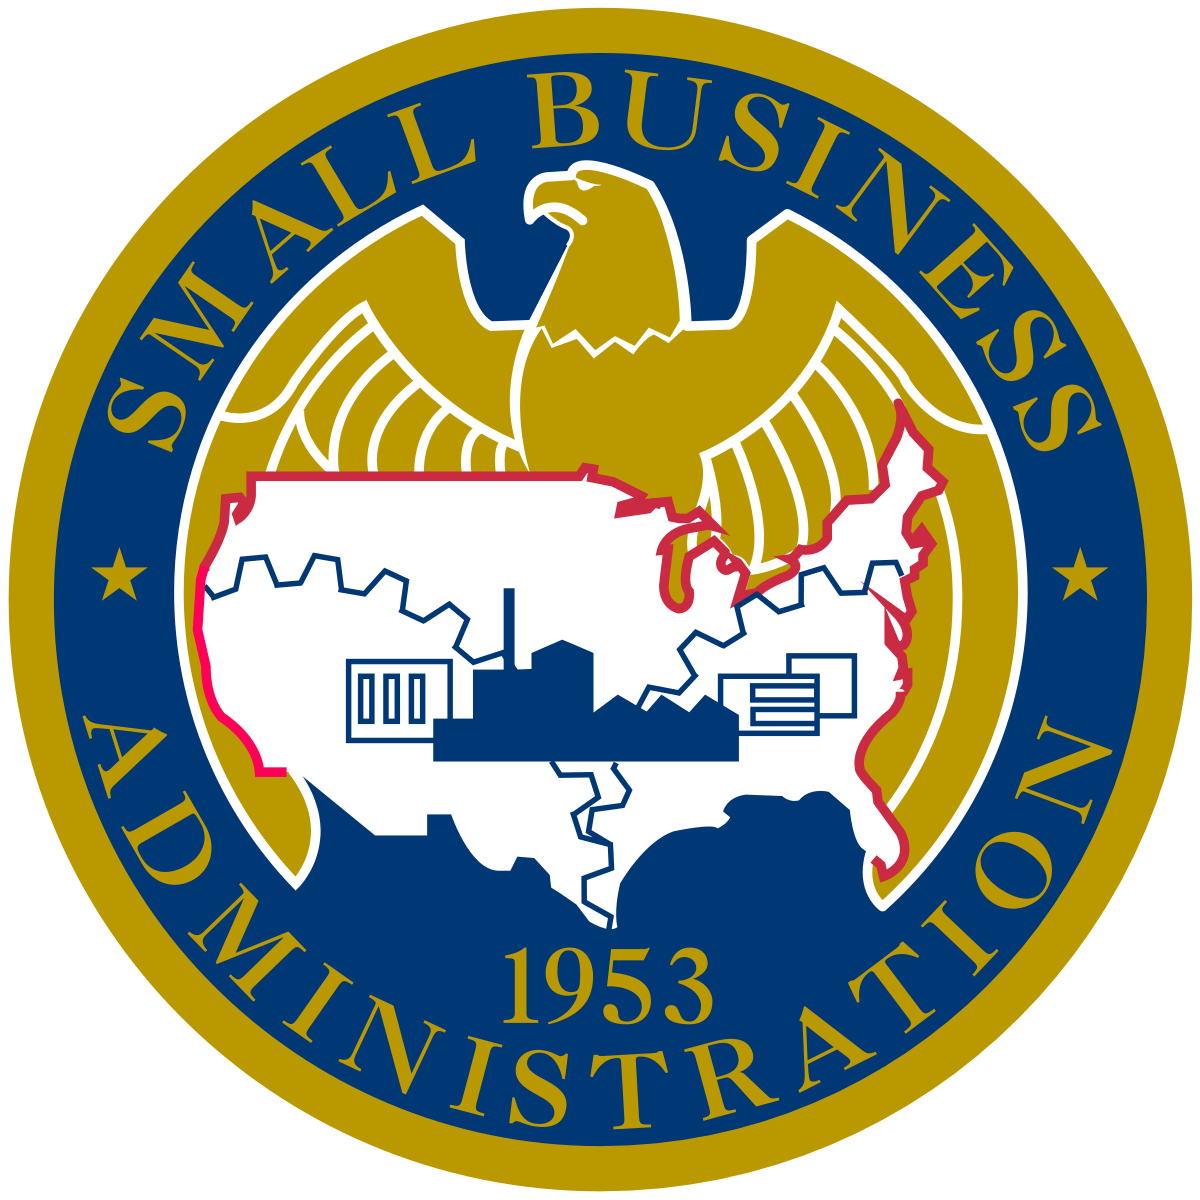 Local businesses affected by COVID-19 can apply for SBA loan